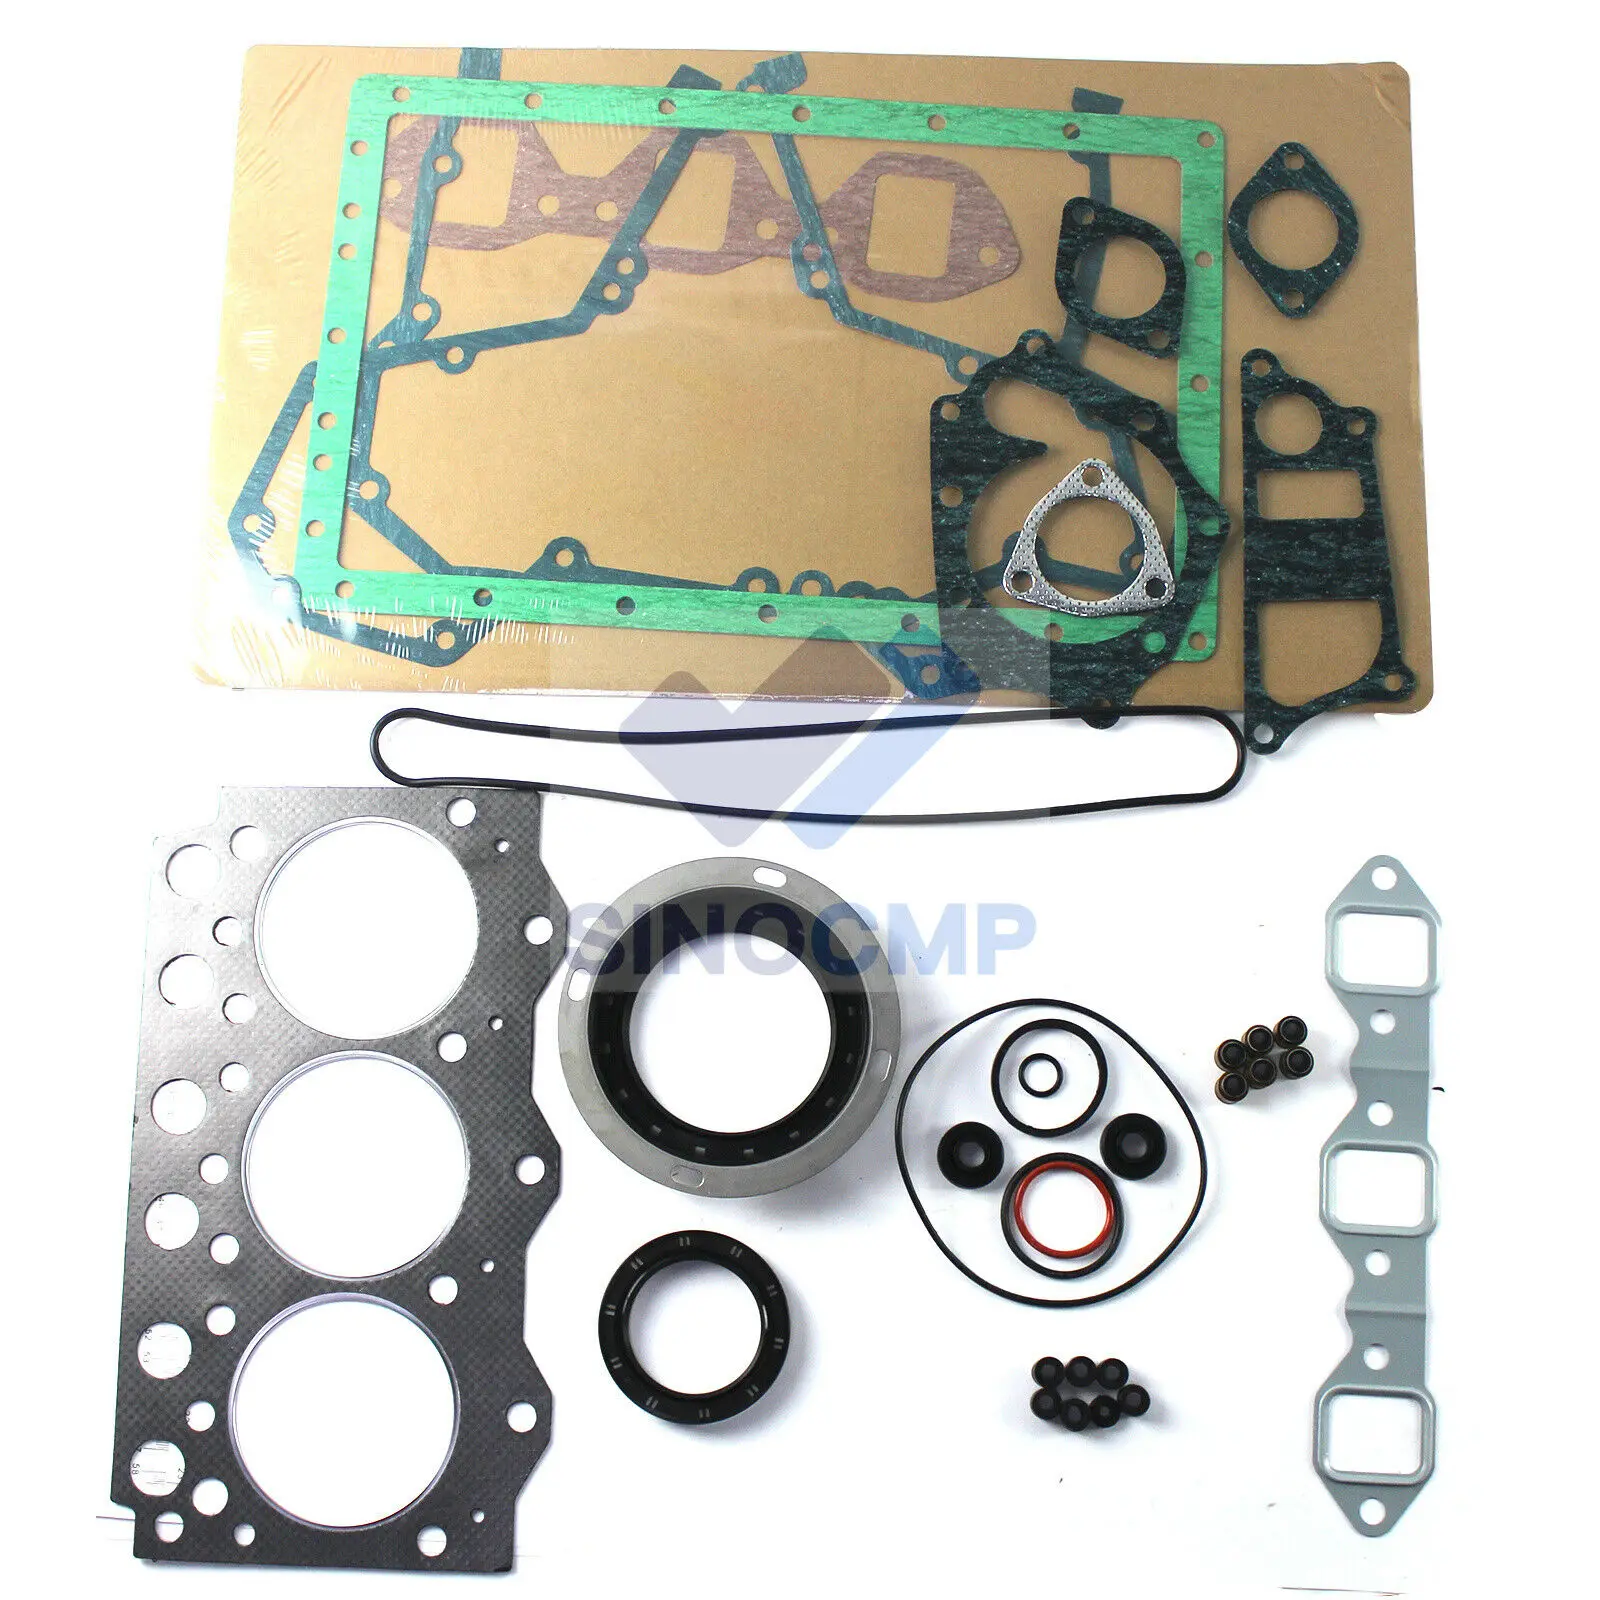 

6201-K1-2000 6201-K2-2000 Overhaul Gasket Kit for Komatsu PC50UU-1 PC40-6 with 3D95S-W-1 3D95S-W Engine Repairing Accessories